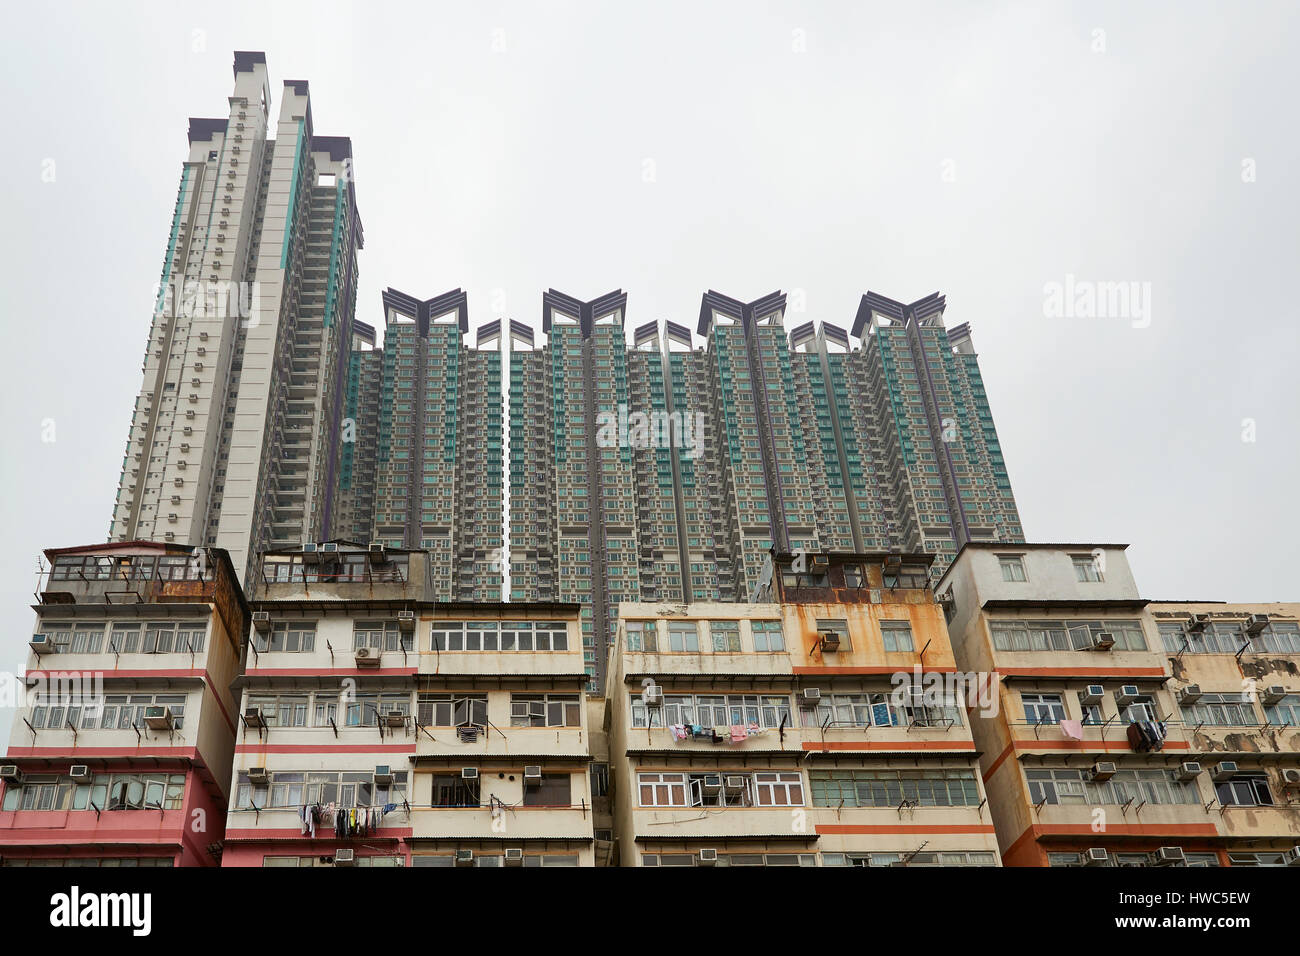 Contrasting High Rise And Low Rise Buildings In Kowloon City, Hong Kong. Stock Photo